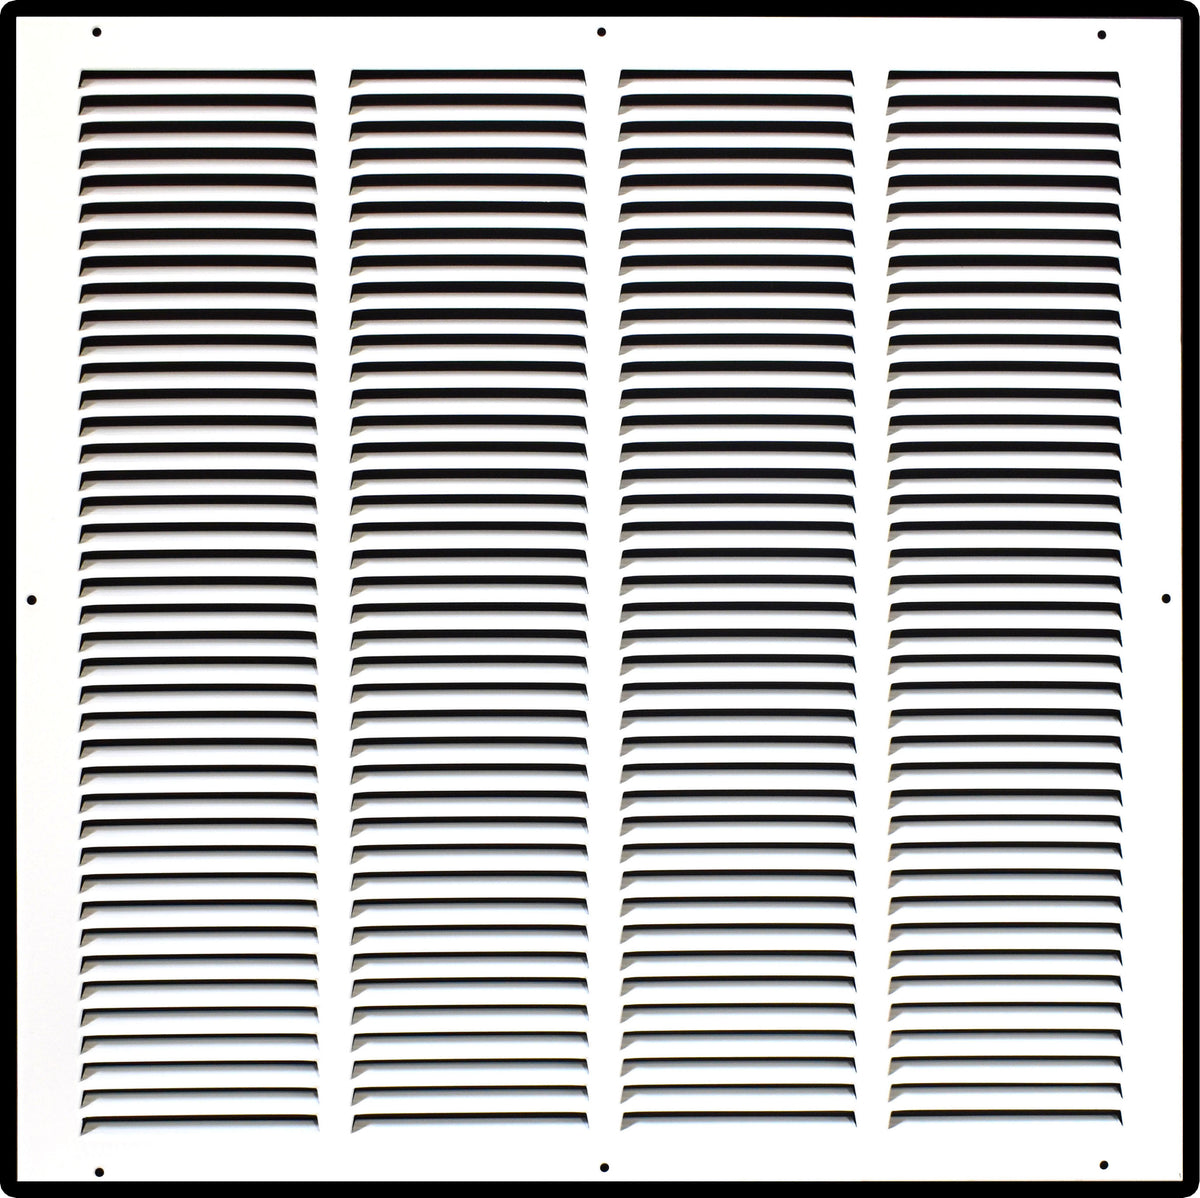 airgrilles 20" x 20" duct opening   hd steel return air grille for sidewall and ceiling  agc  7agc-flt-wh-20x20 756014649611 - 1